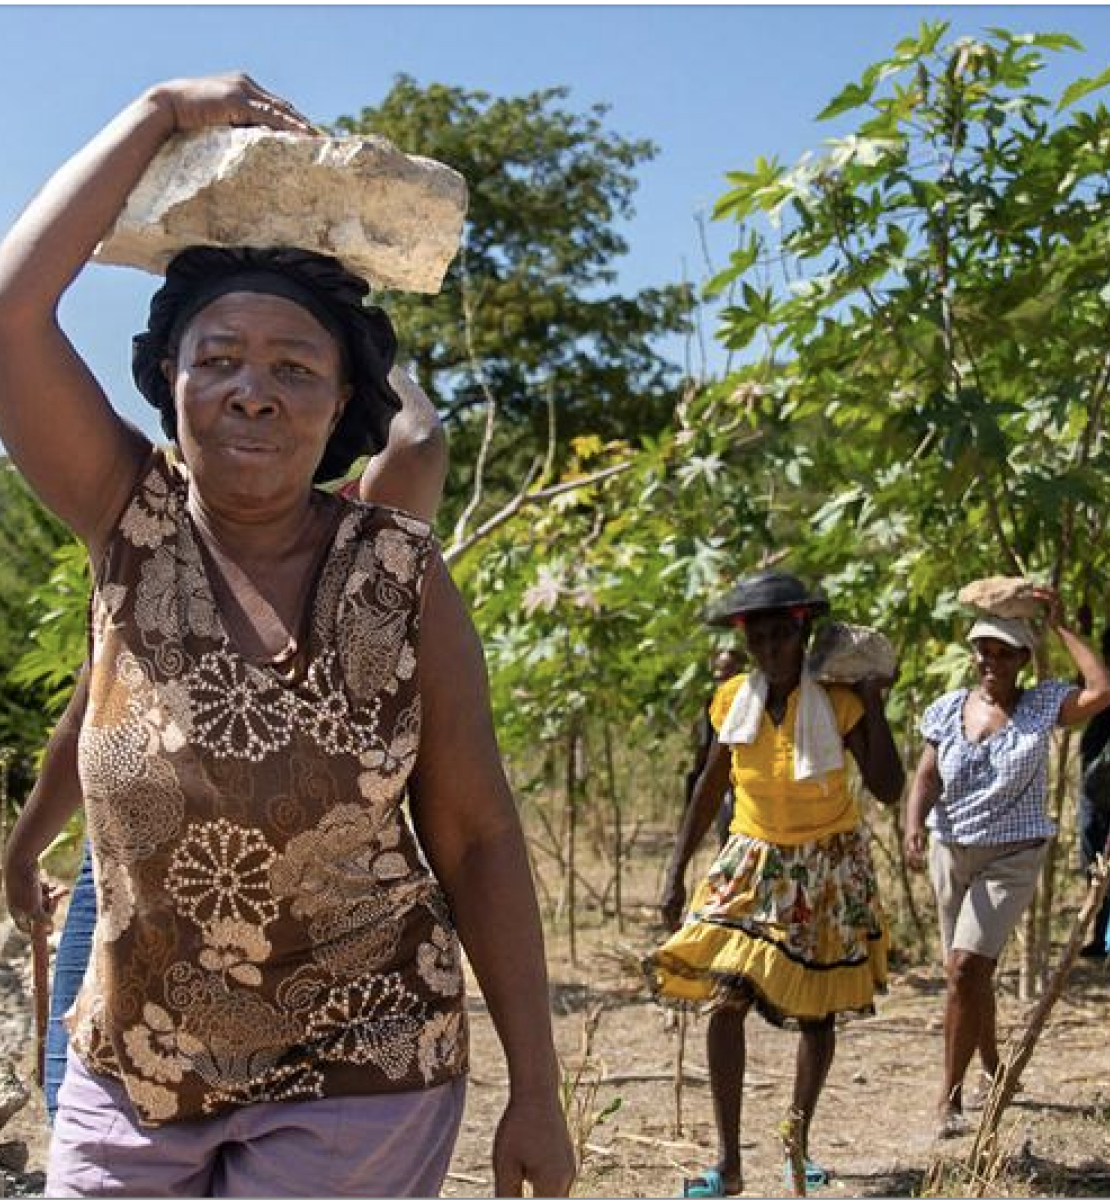 Women join a community effort to rehabilitate roads damaged by the earthquake in the south-west of Haiti.